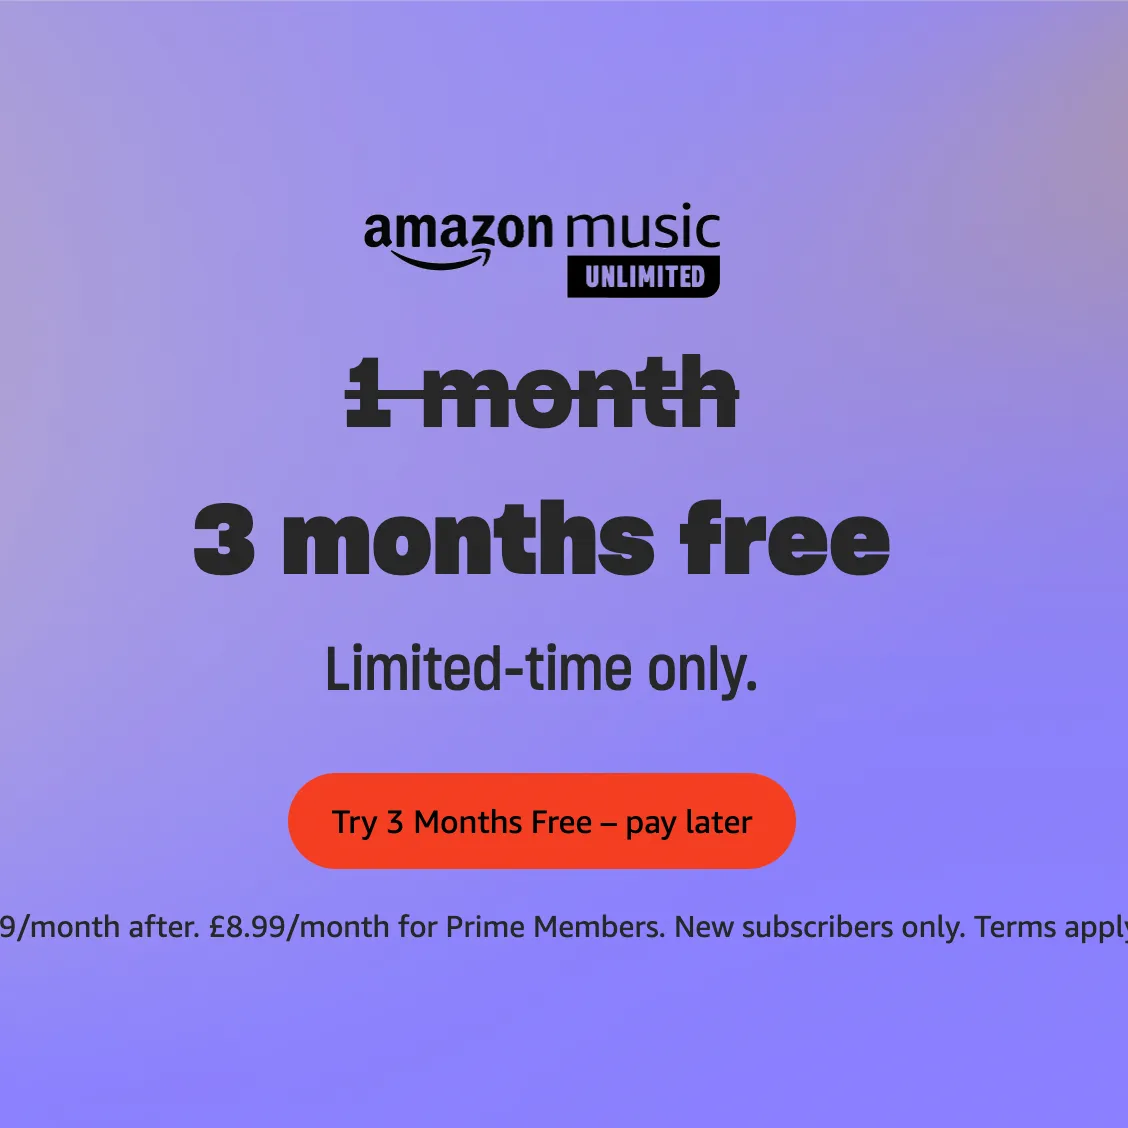 Free 3 Months Of Amazon Music Streaming (Worth £26.97)